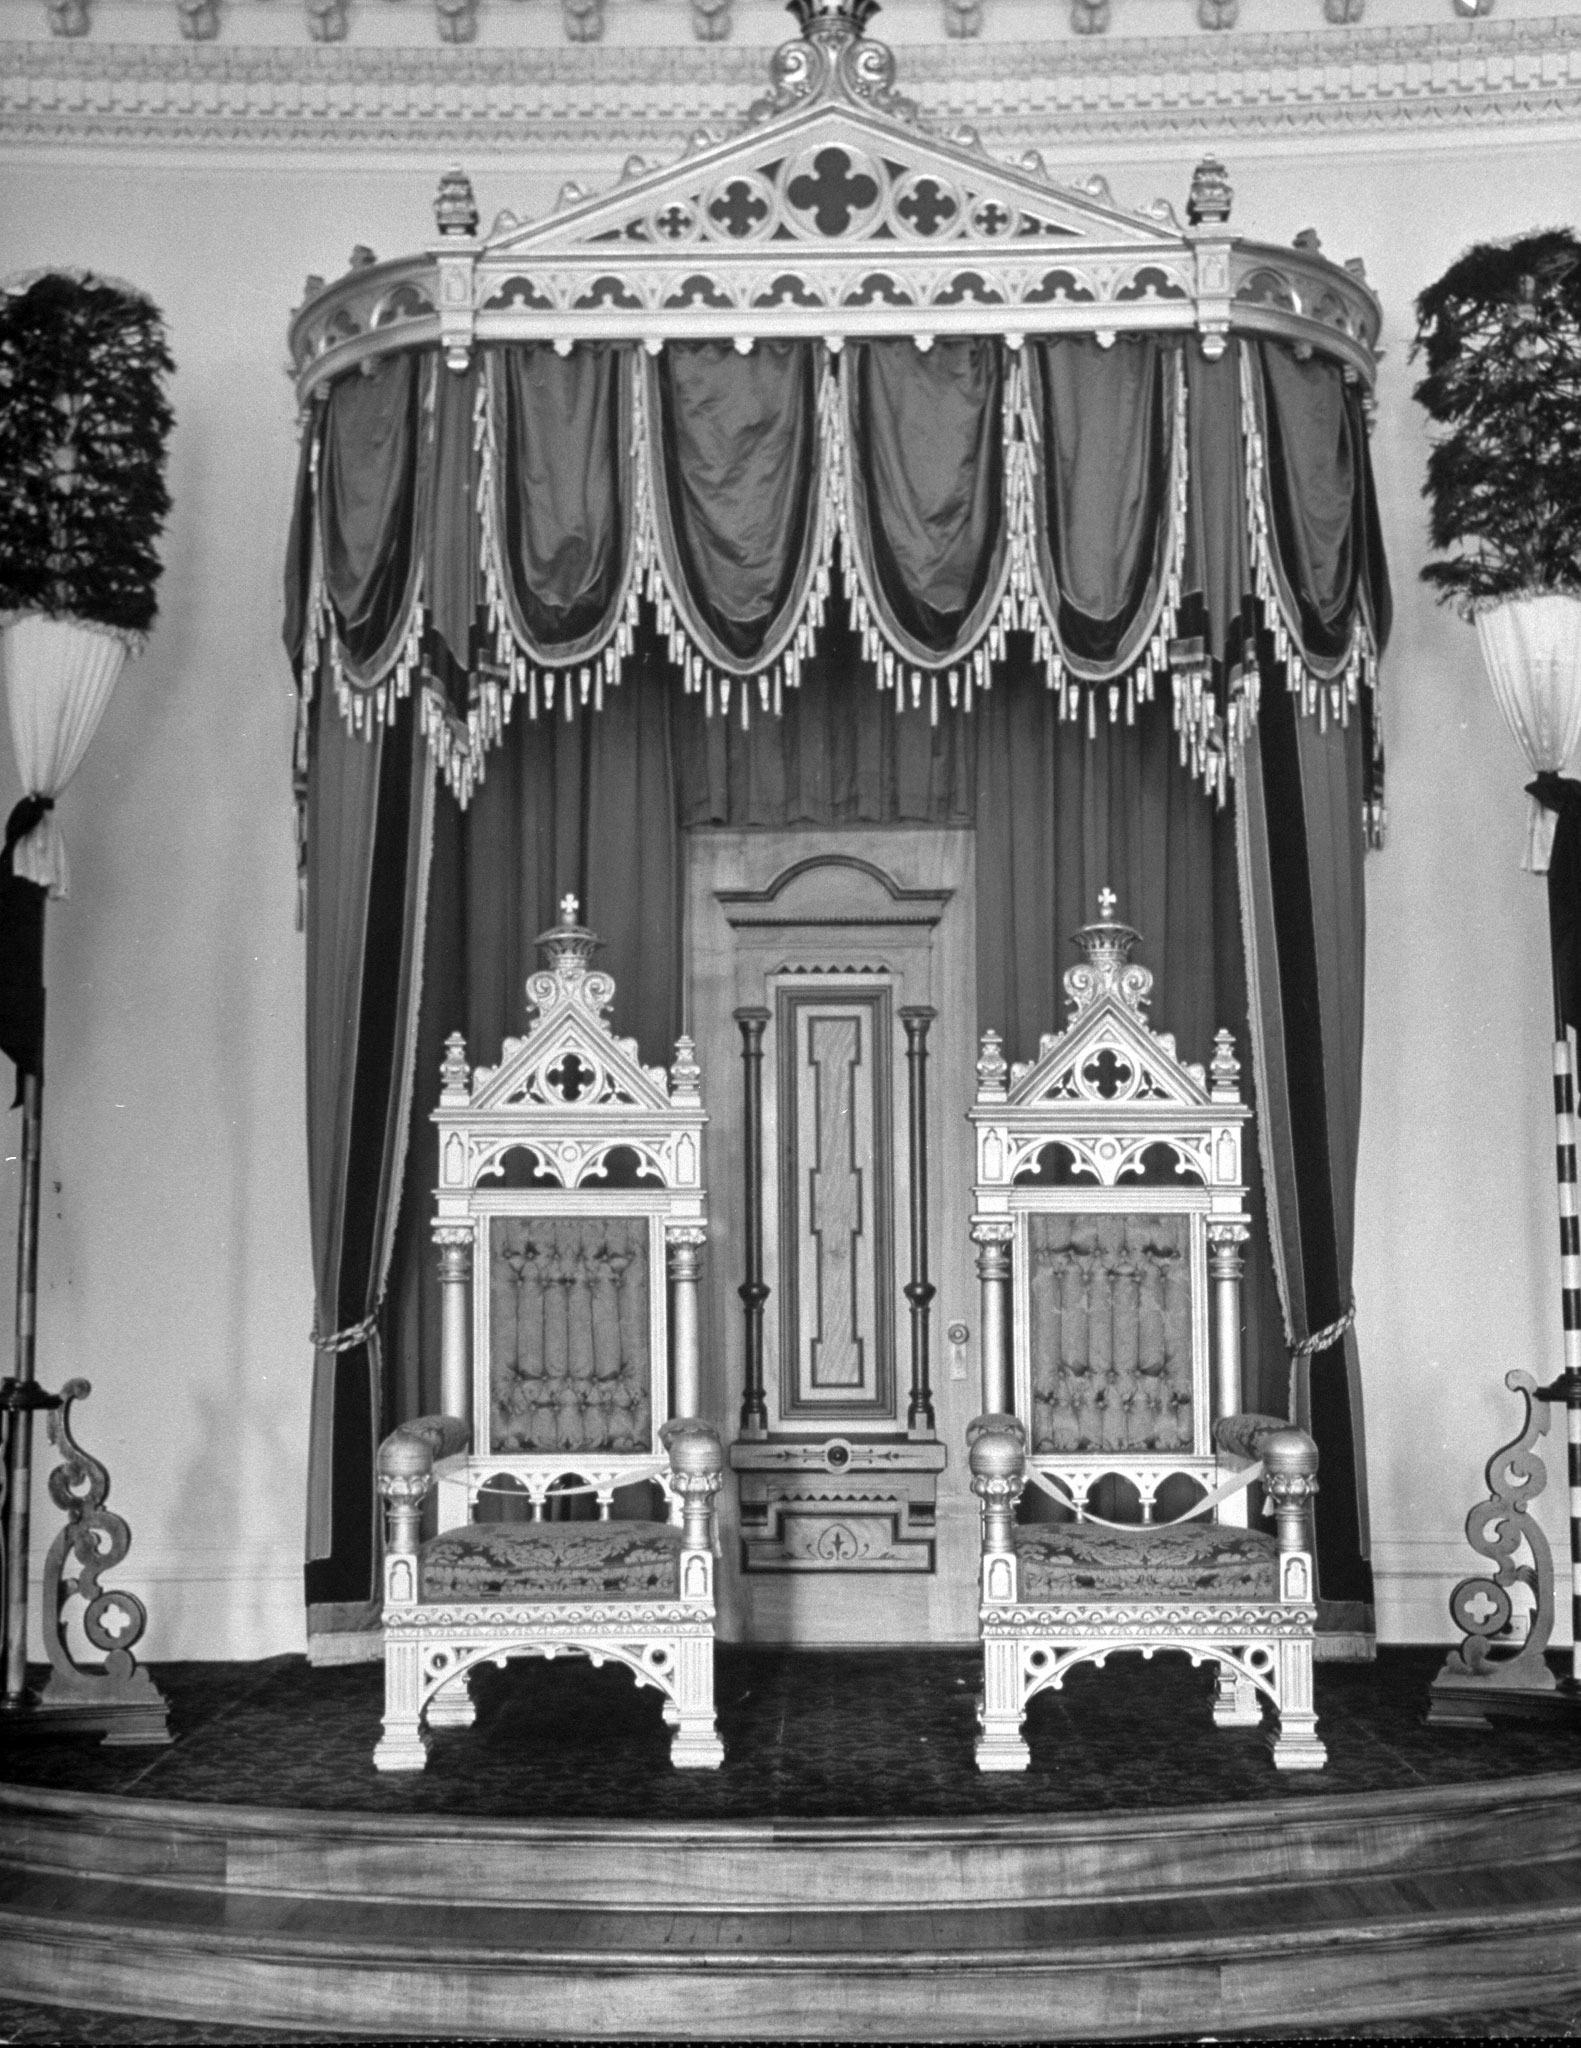 Two thrones on display in the throne room of the Lolani palace, Hawaii.